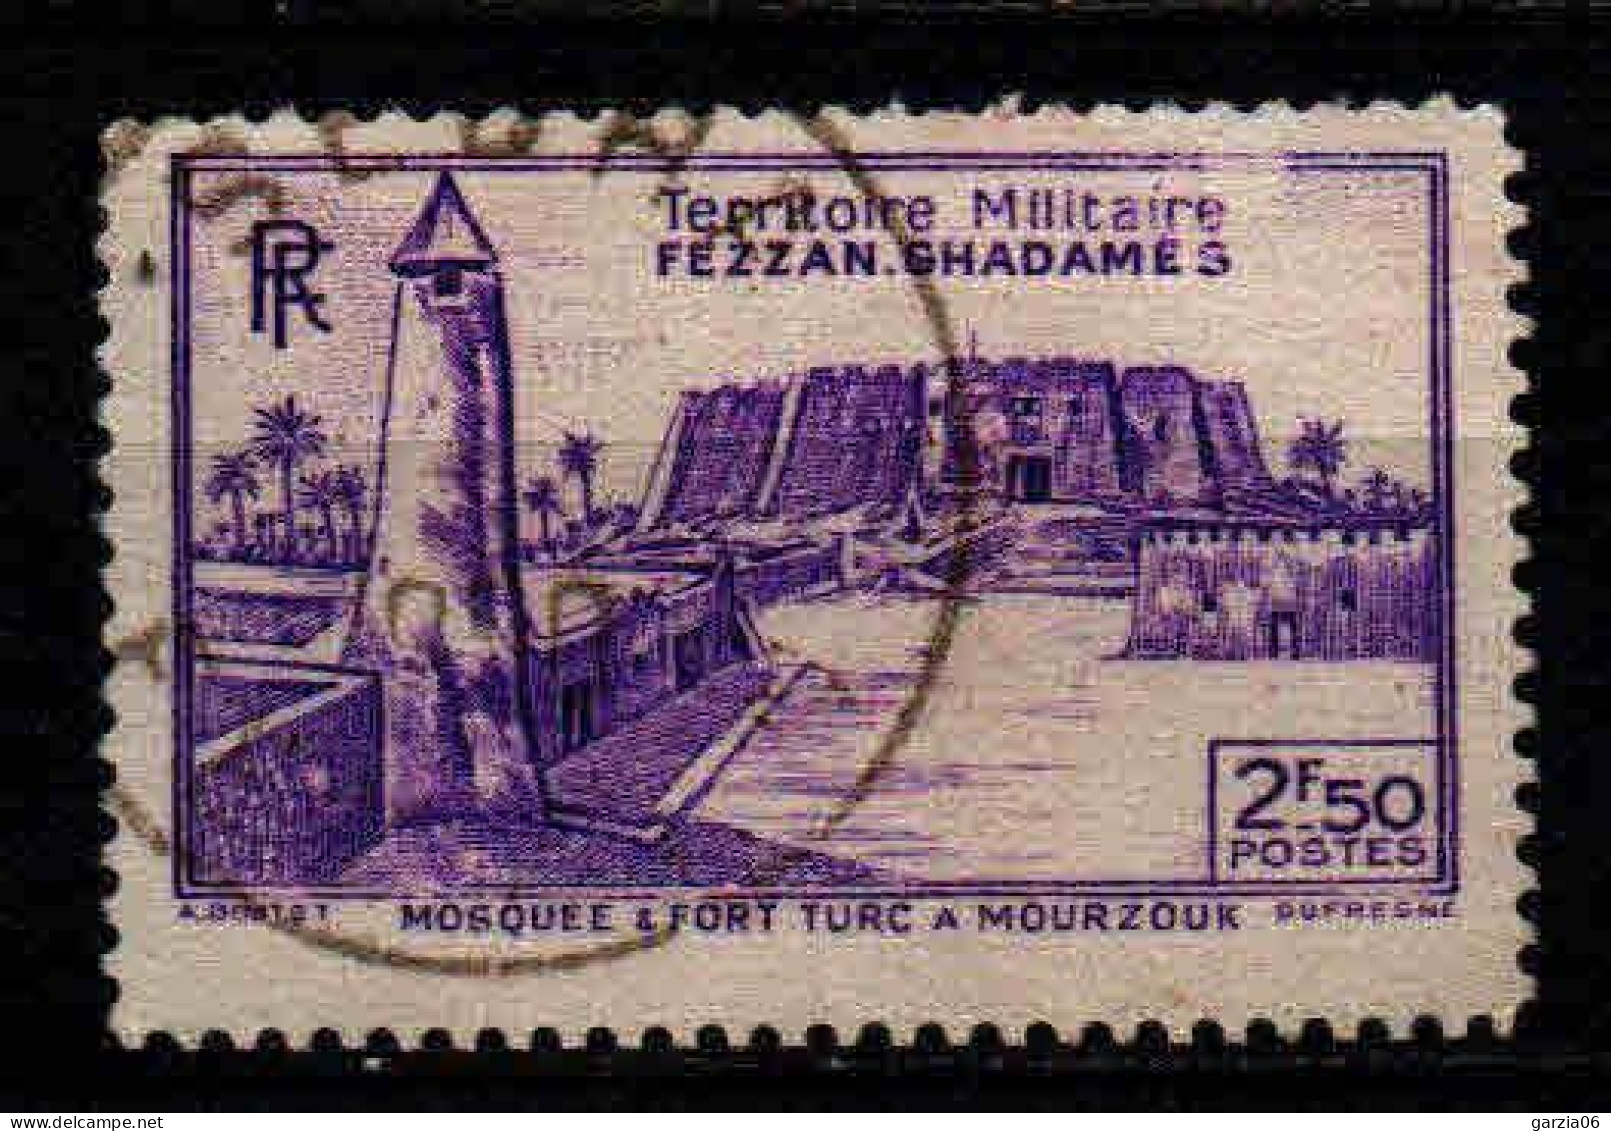 Fezzan  - 1946 -  Mourzouk -   N° 33  - Oblit - Used - Used Stamps